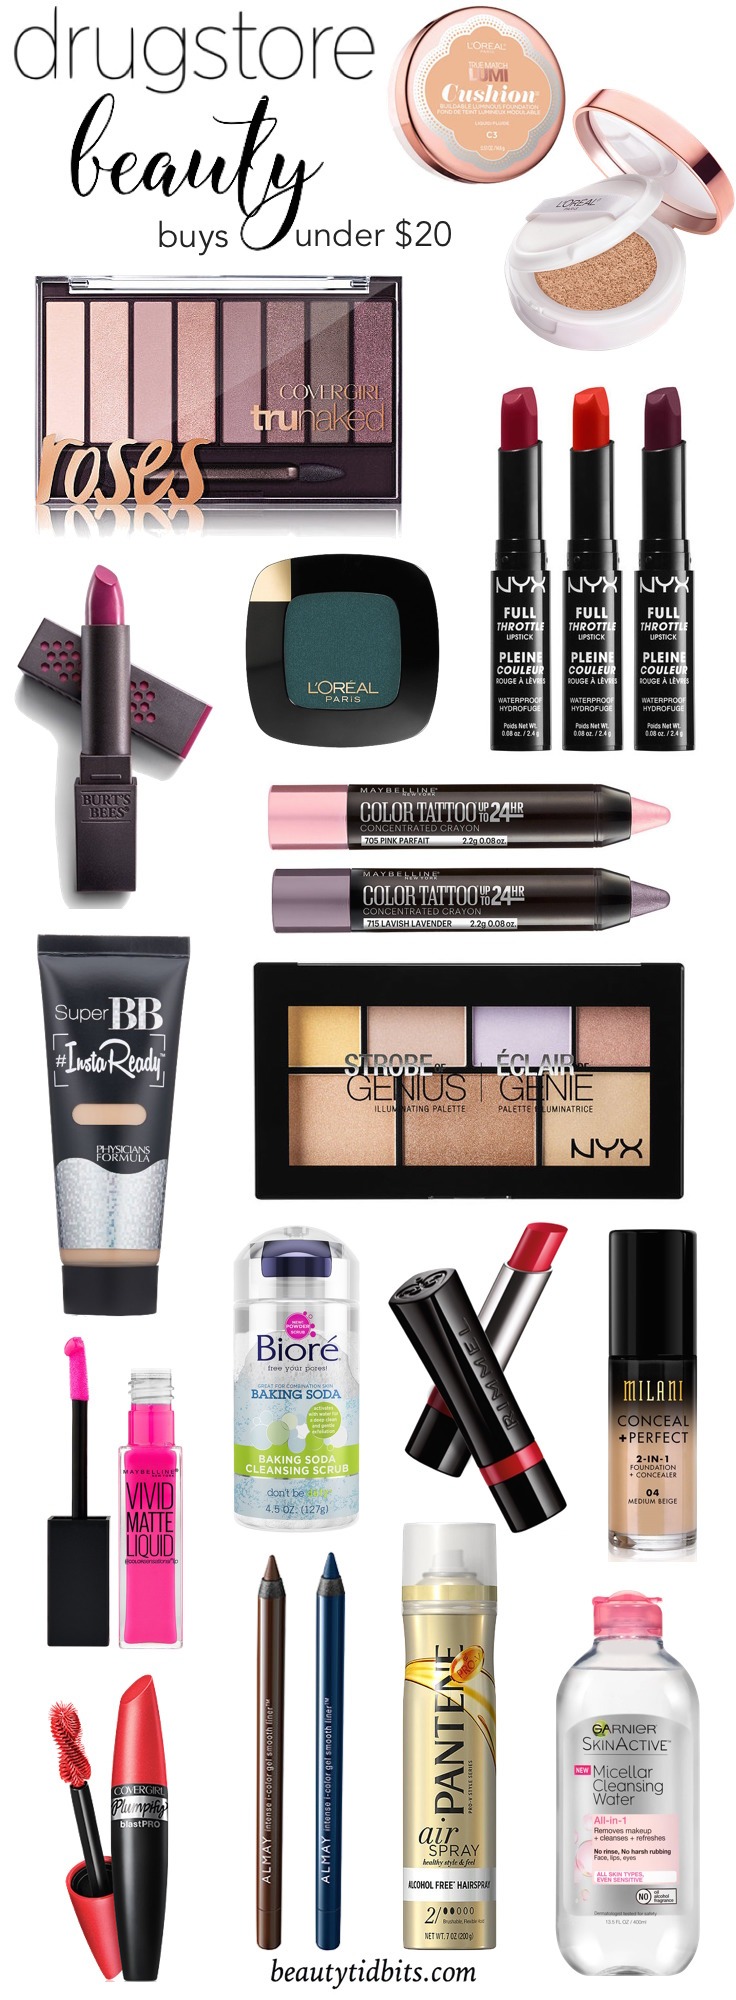 mølle Let at ske mulighed Cheap & Chic! 16 New Drugstore Beauty Products For 2016 - BeautyTidbits